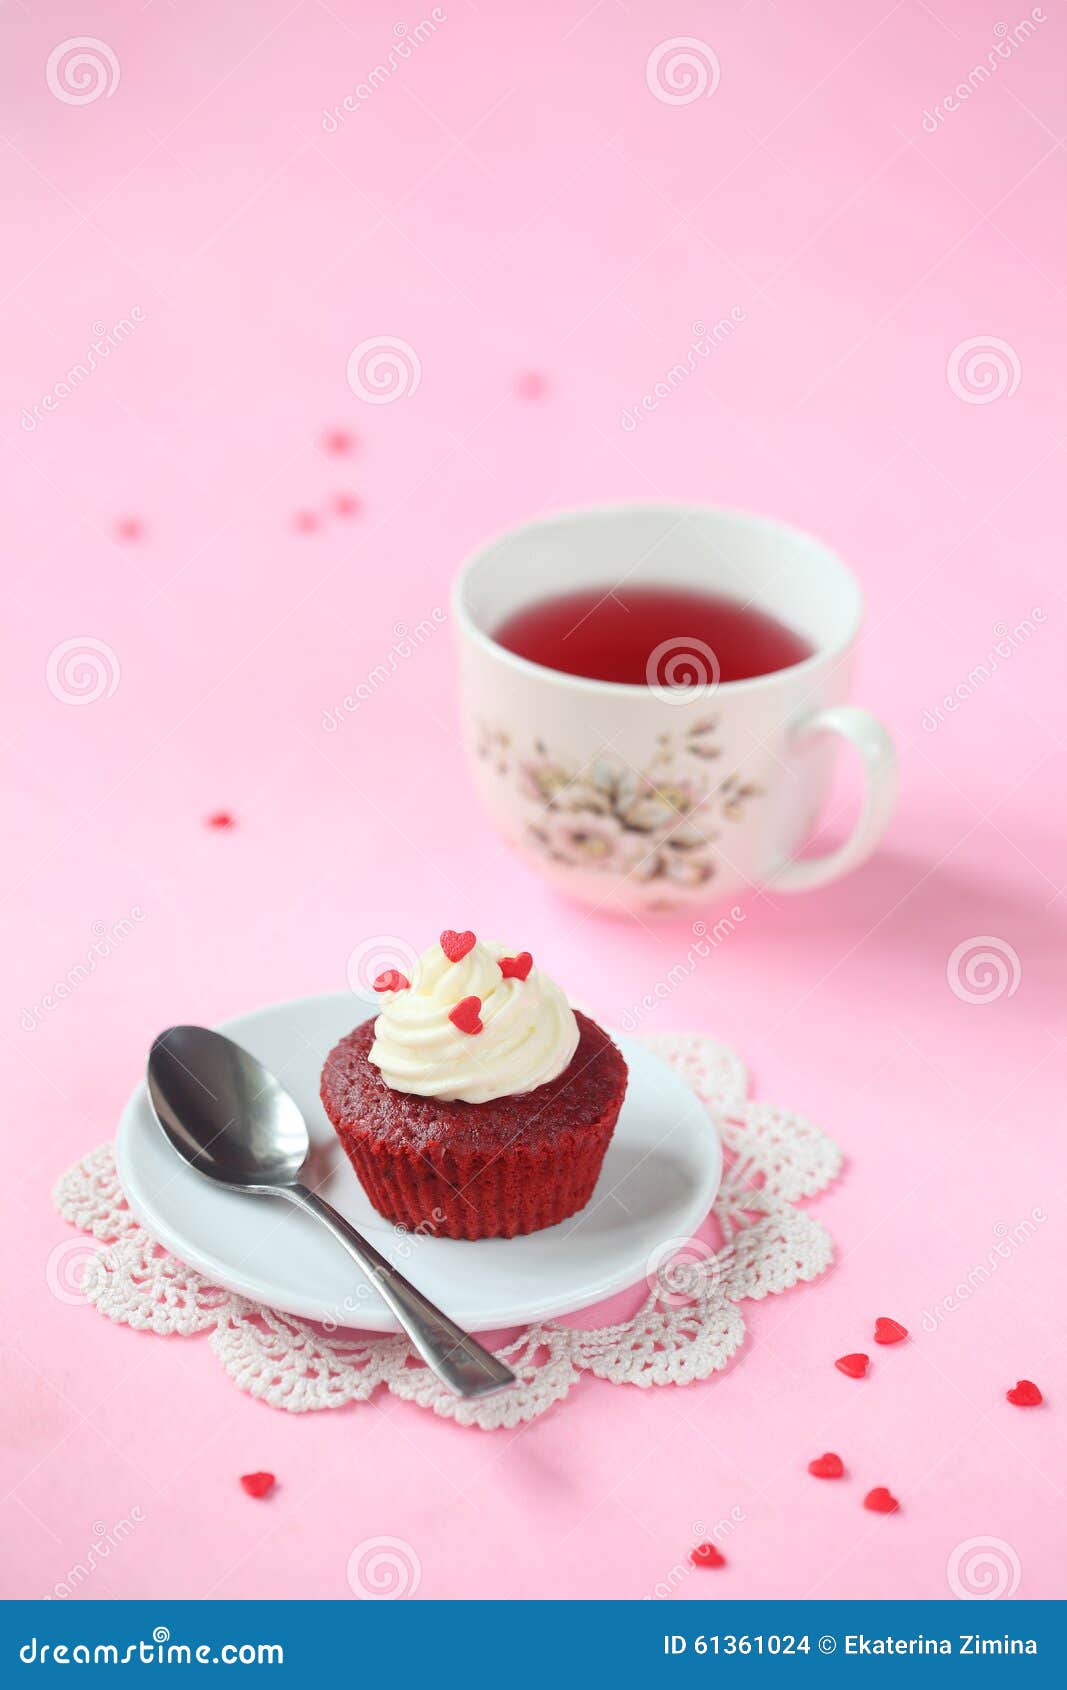 Red Velvet Cupcake with Cream Cheese Frosting Stock Photo - Image of ...